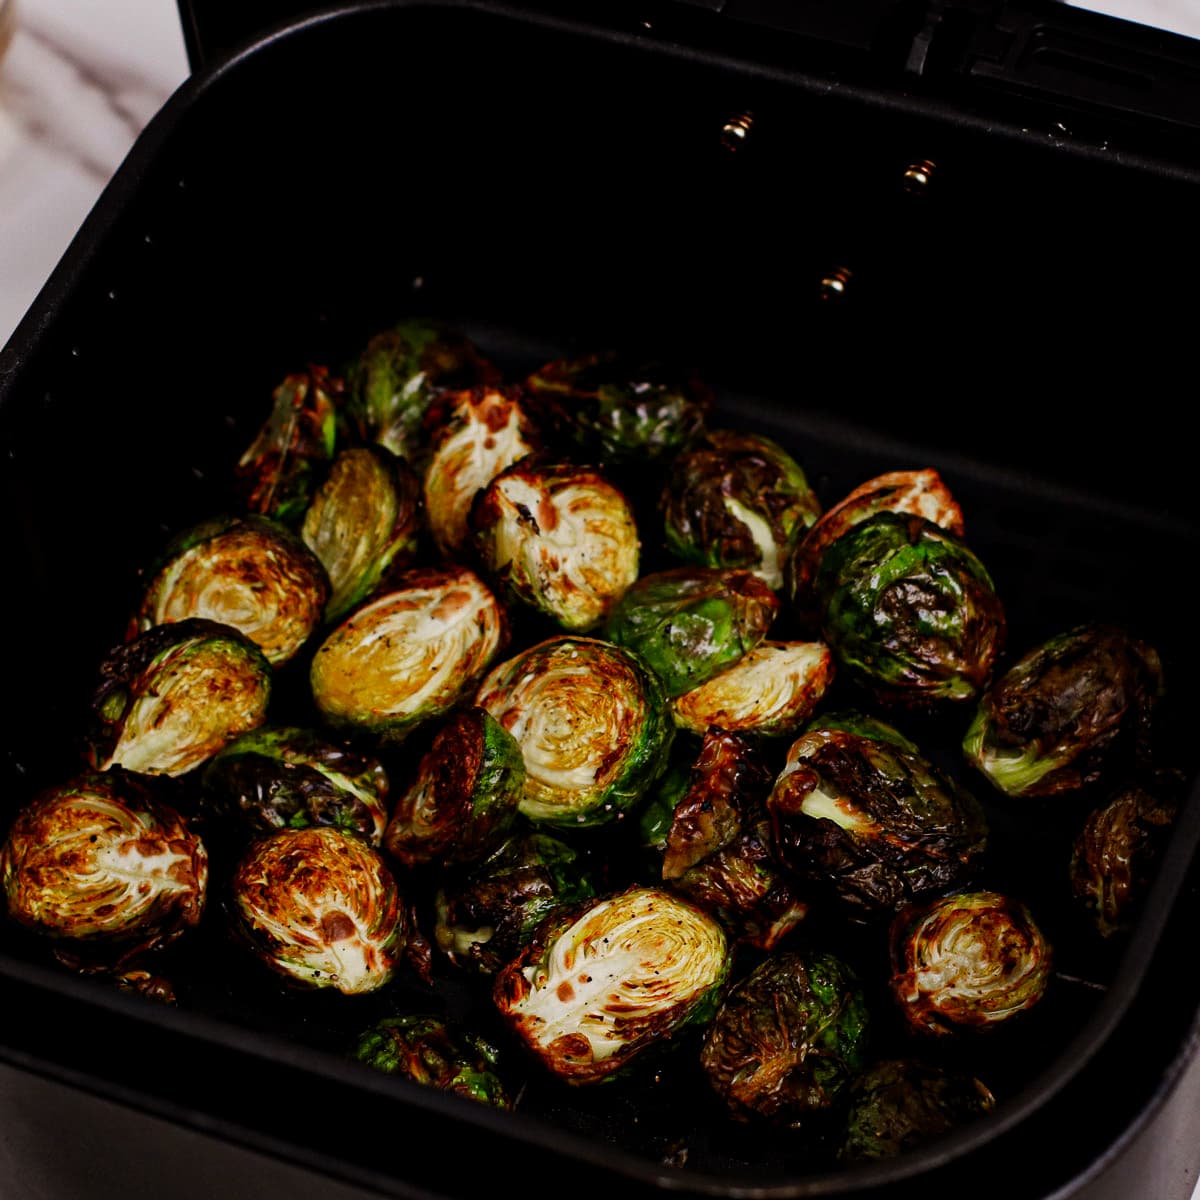 Roasted brussels sprouts in air fryer